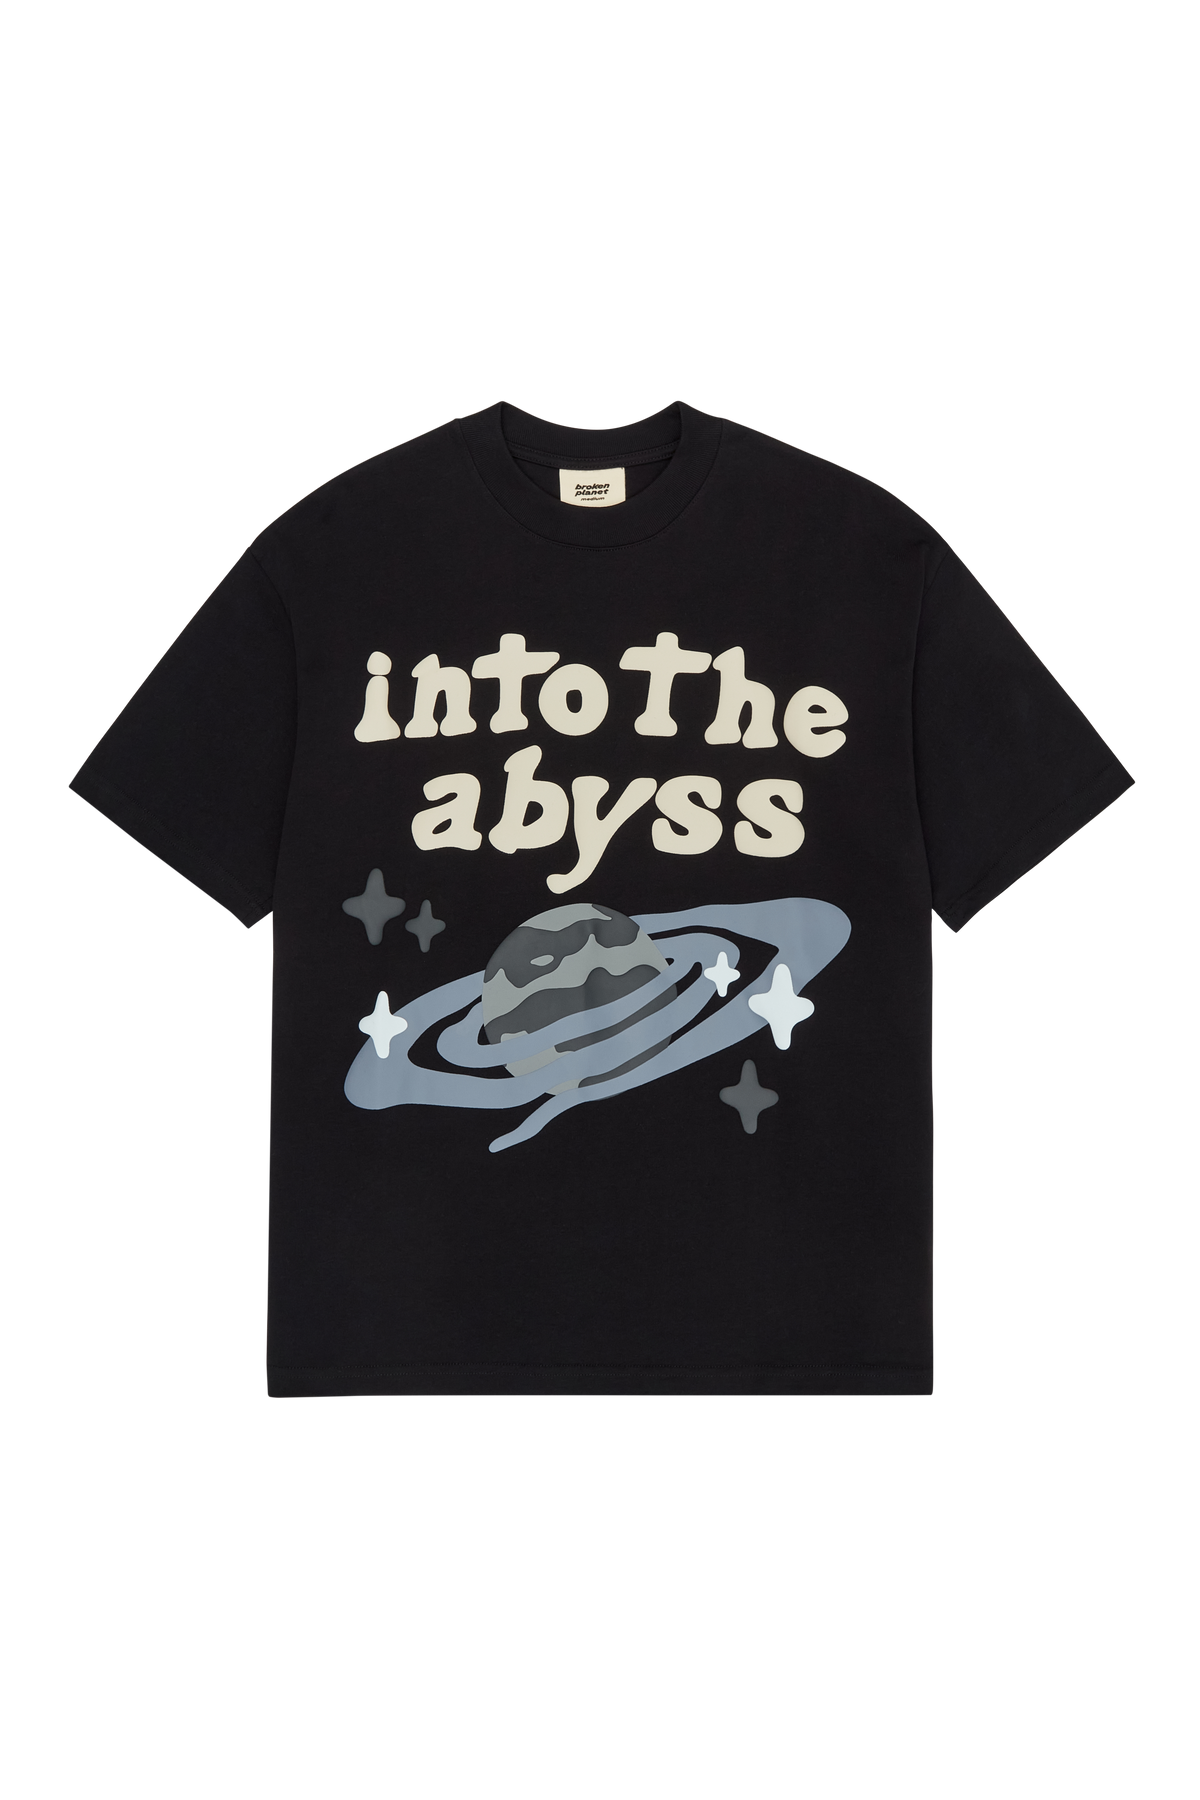 BROKEN PLANET 'INTO THE ABYSS' SOOT BLACK T-SHIRT